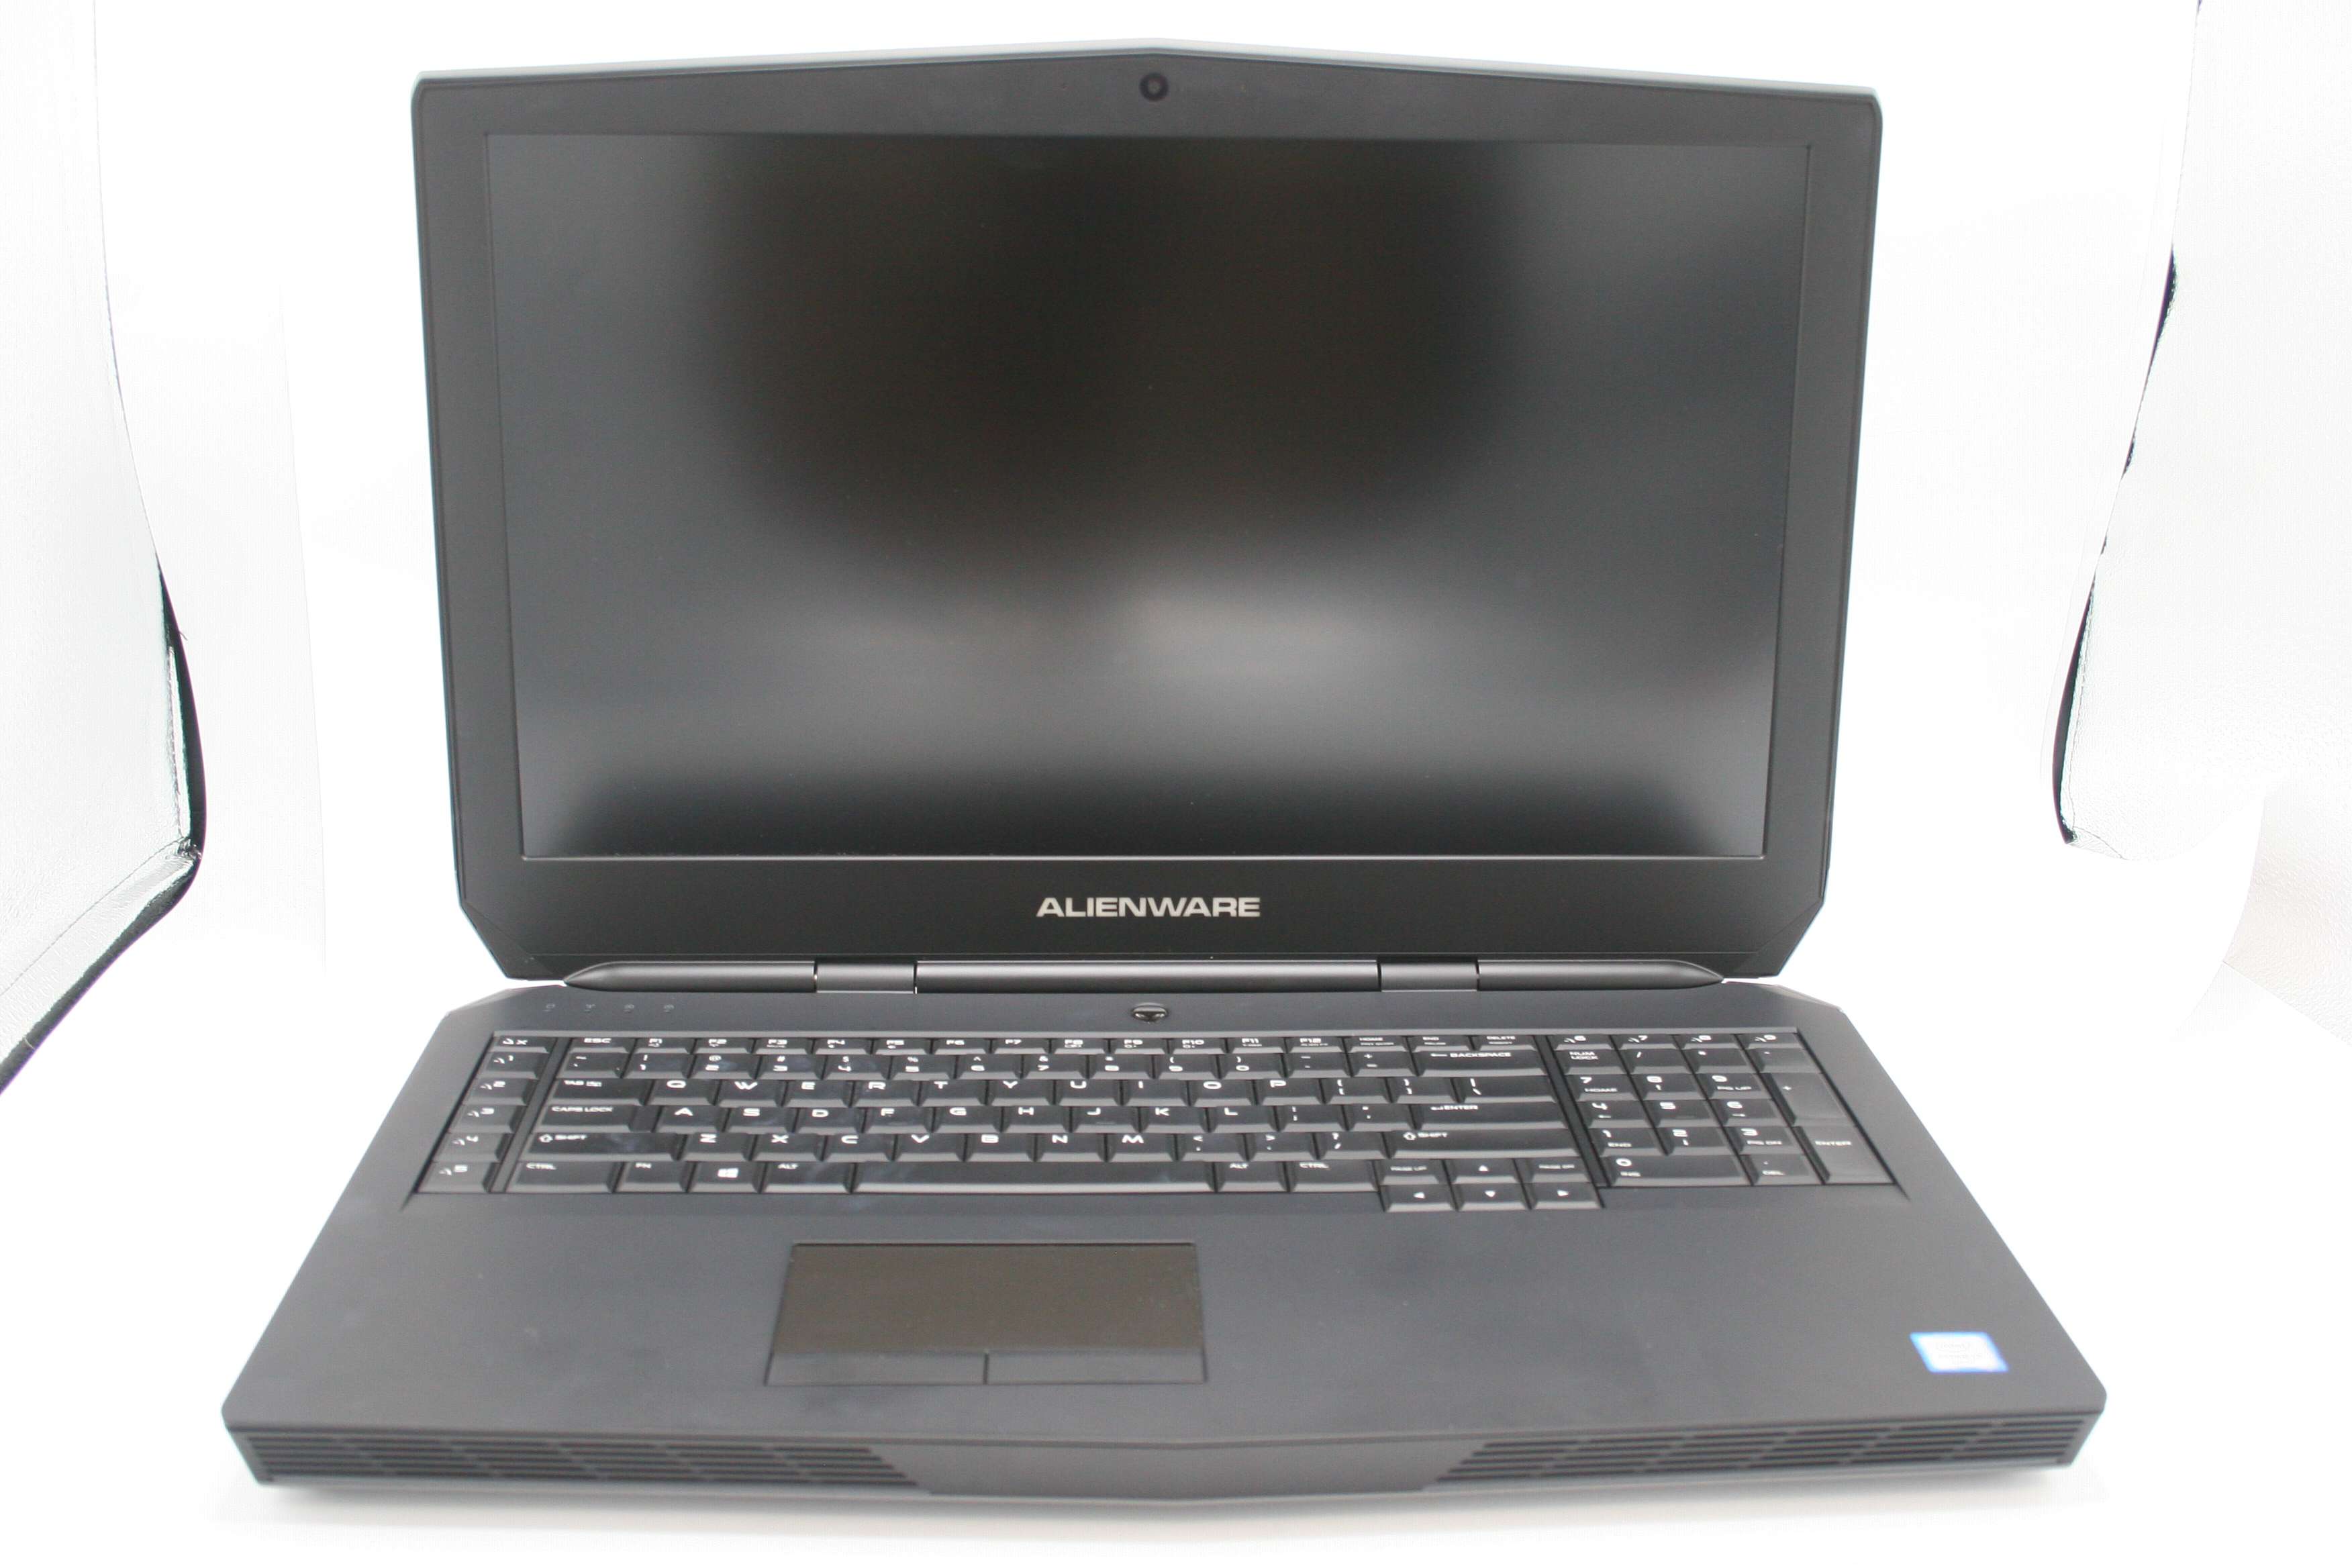 ALIENWARE 17-R3 Laptop Intel i7 2.59GHz 8G RAM 128G SSD 1T HDD Graphics